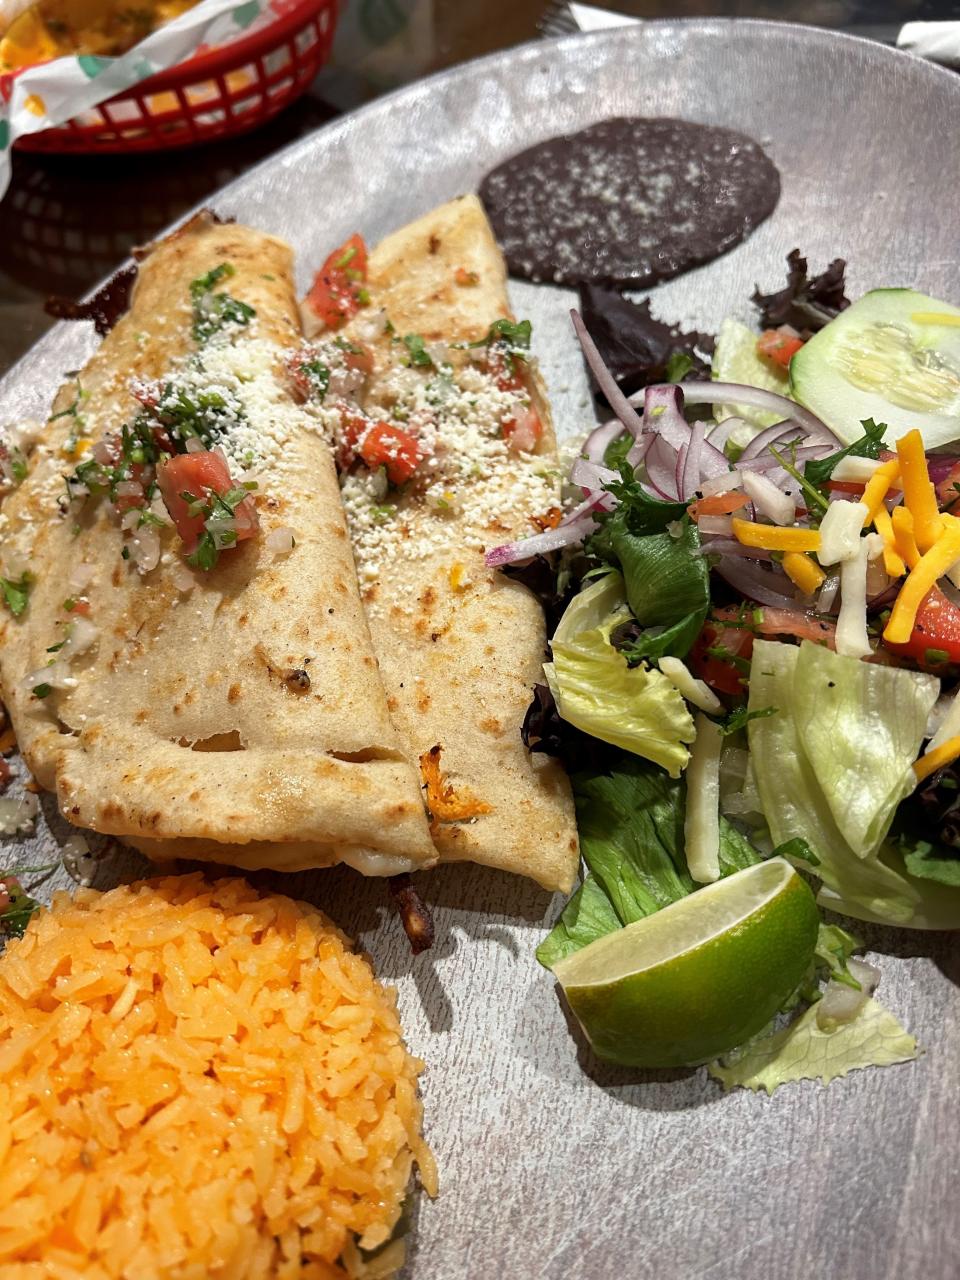 A chicken quesadilla at La Cabañita in the Manahawkin section of Stafford.